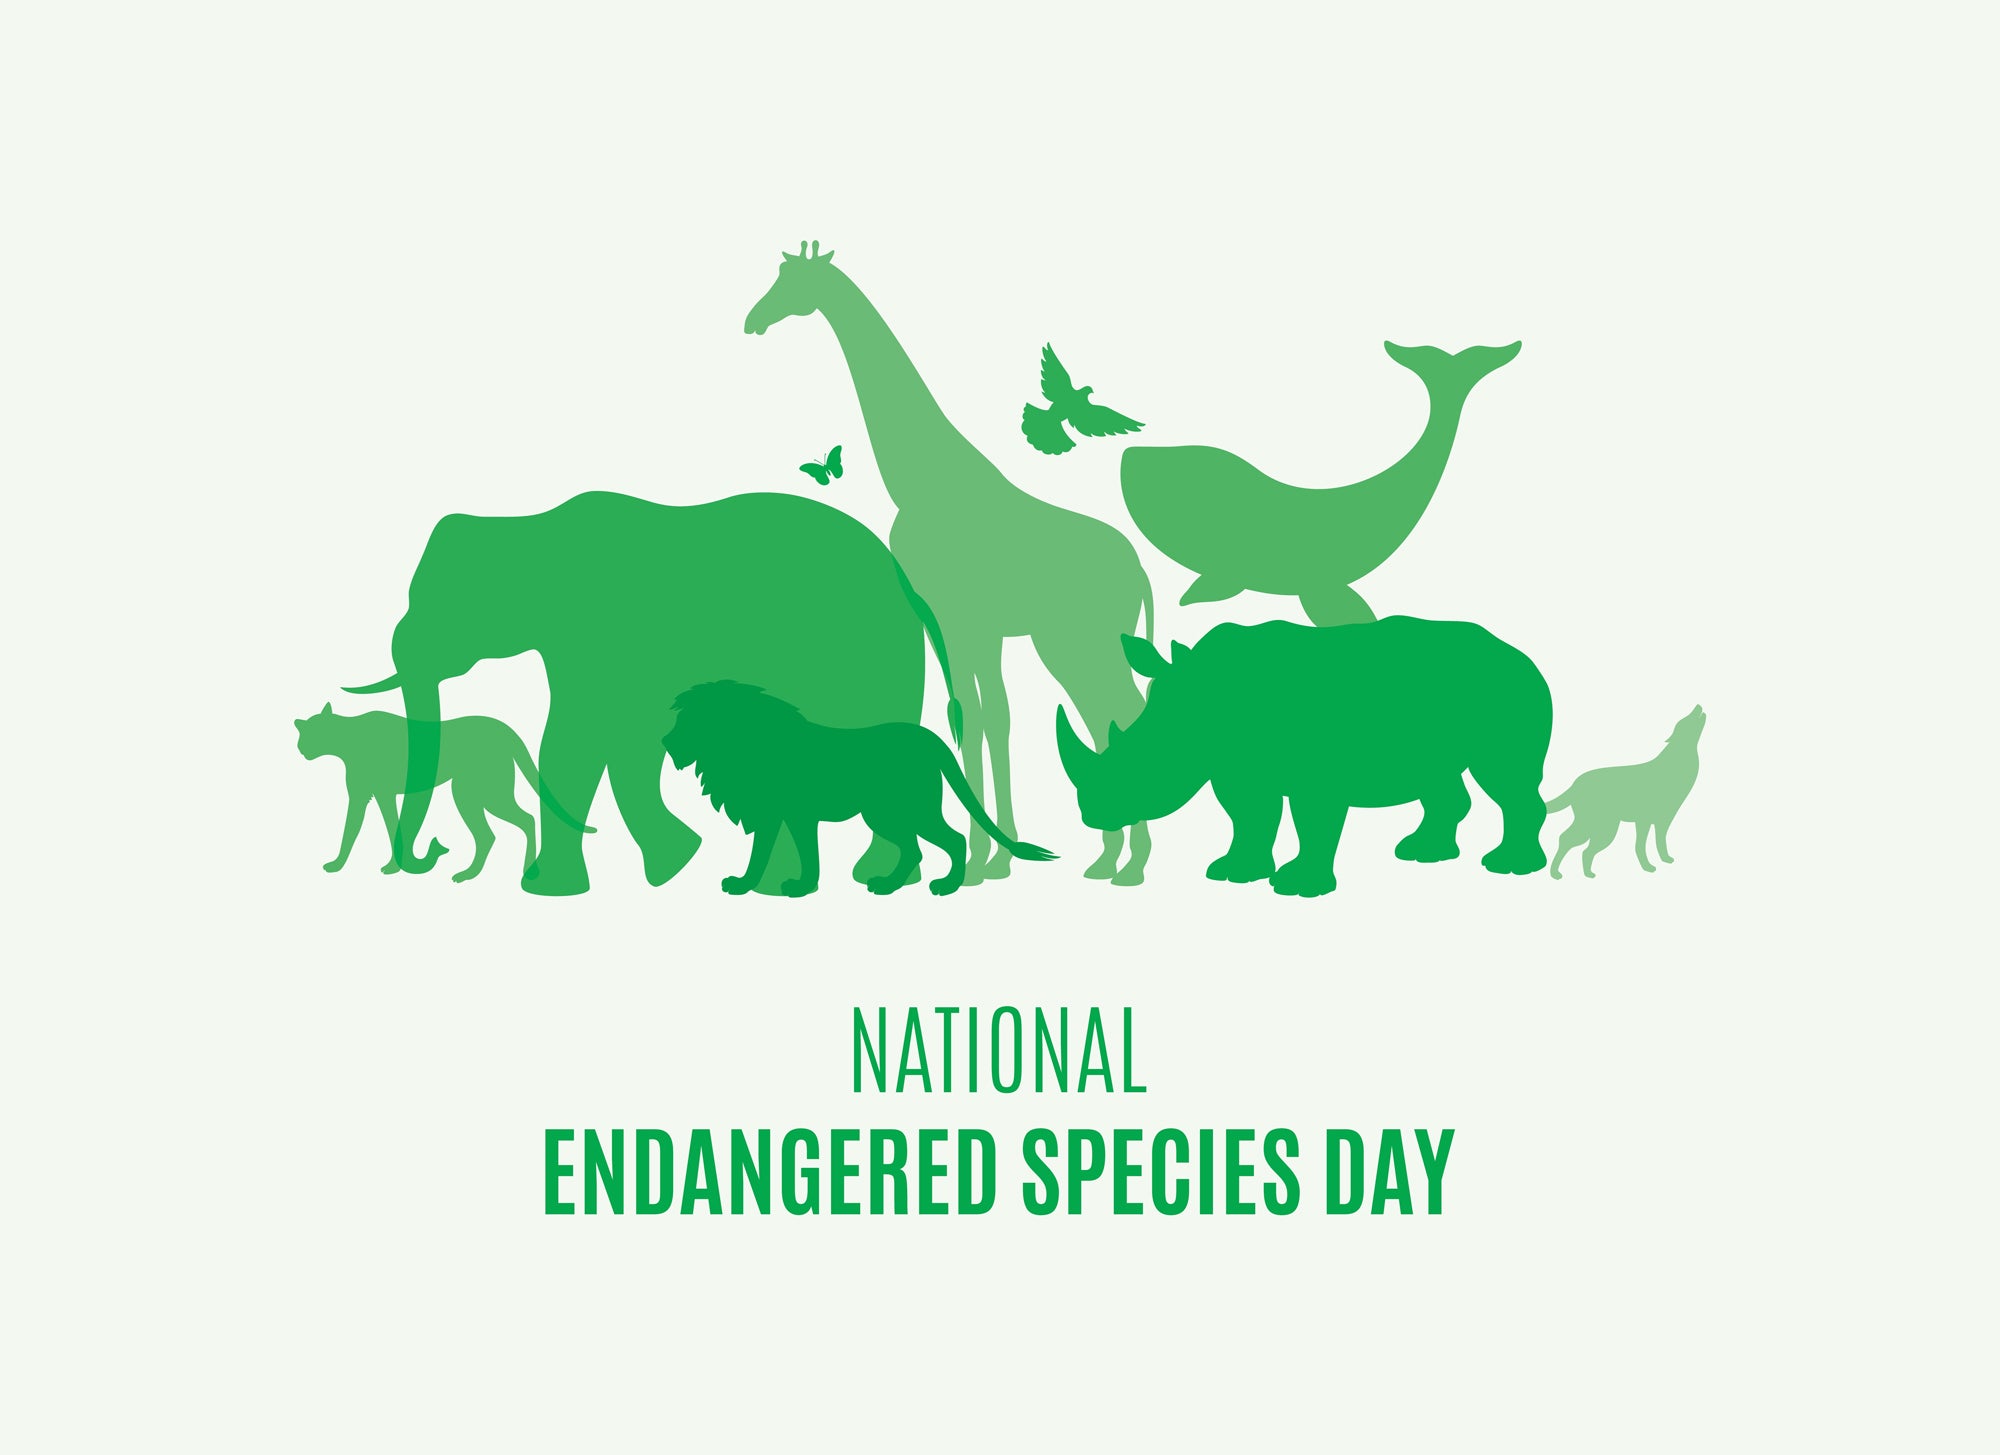 National Endangered Species Day with silhouettes of various endangered animals